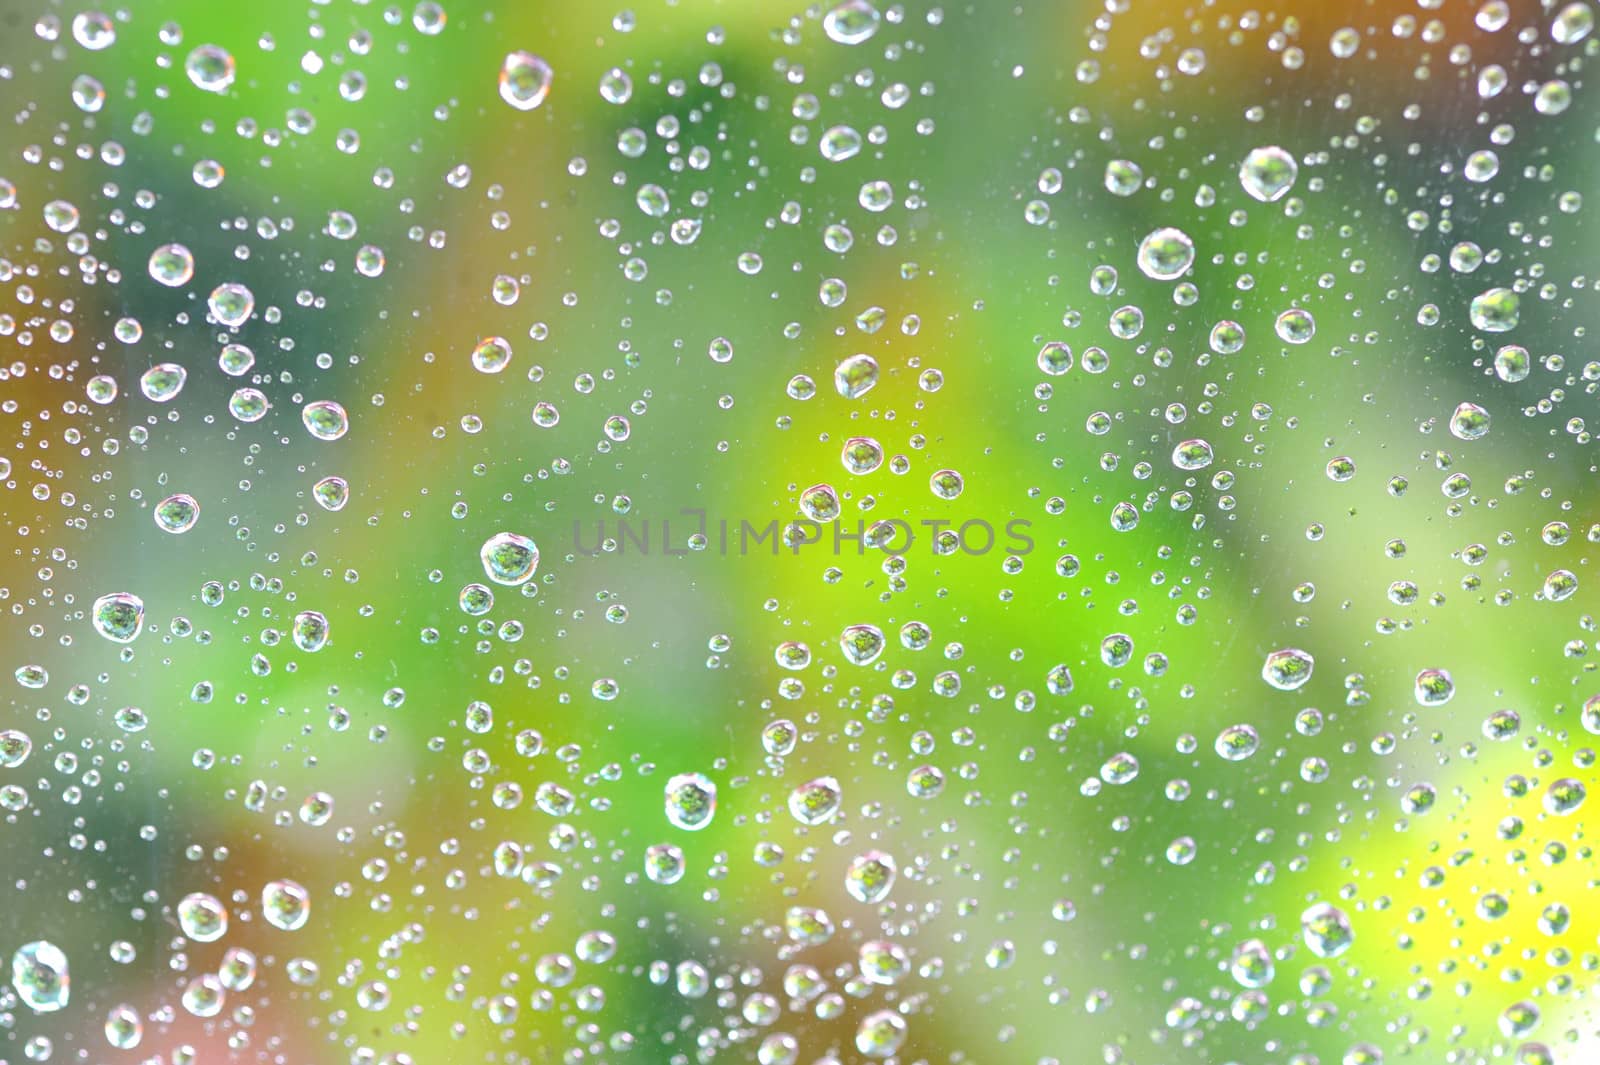 Drops of rain on the glass  by mady70